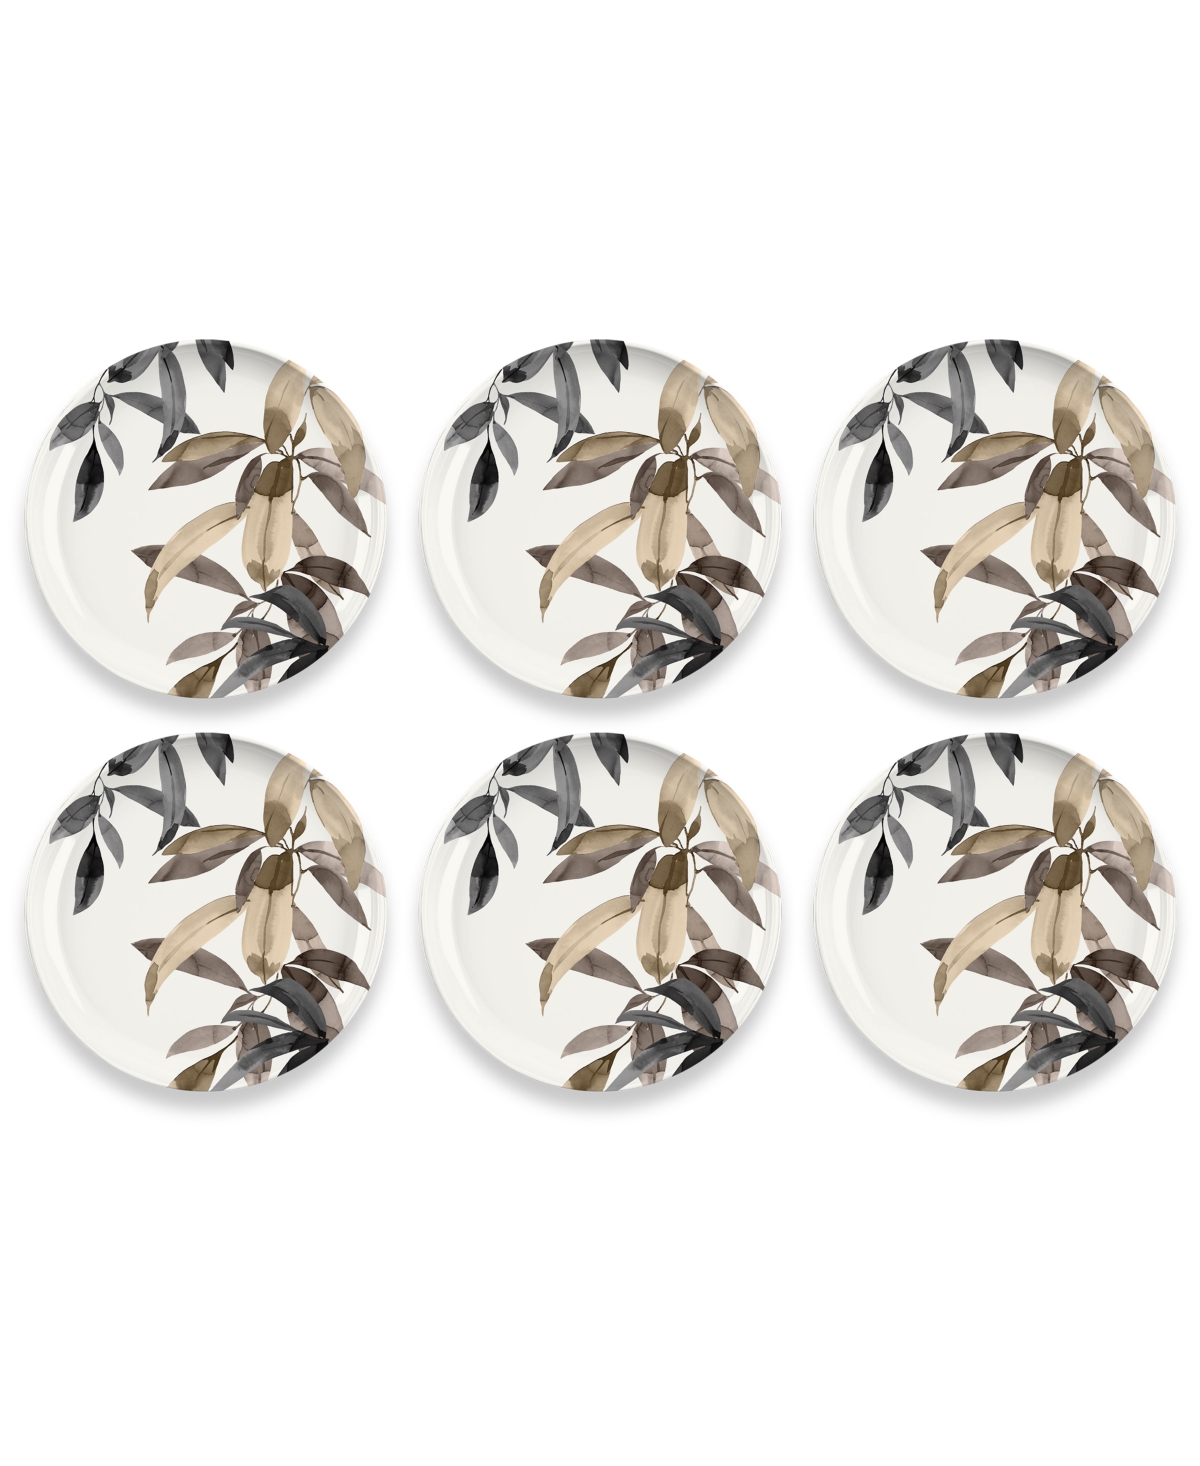 Bali Leaves 10.5" Dinner Plates Merge, Set of 6, Service for 6 - Brown